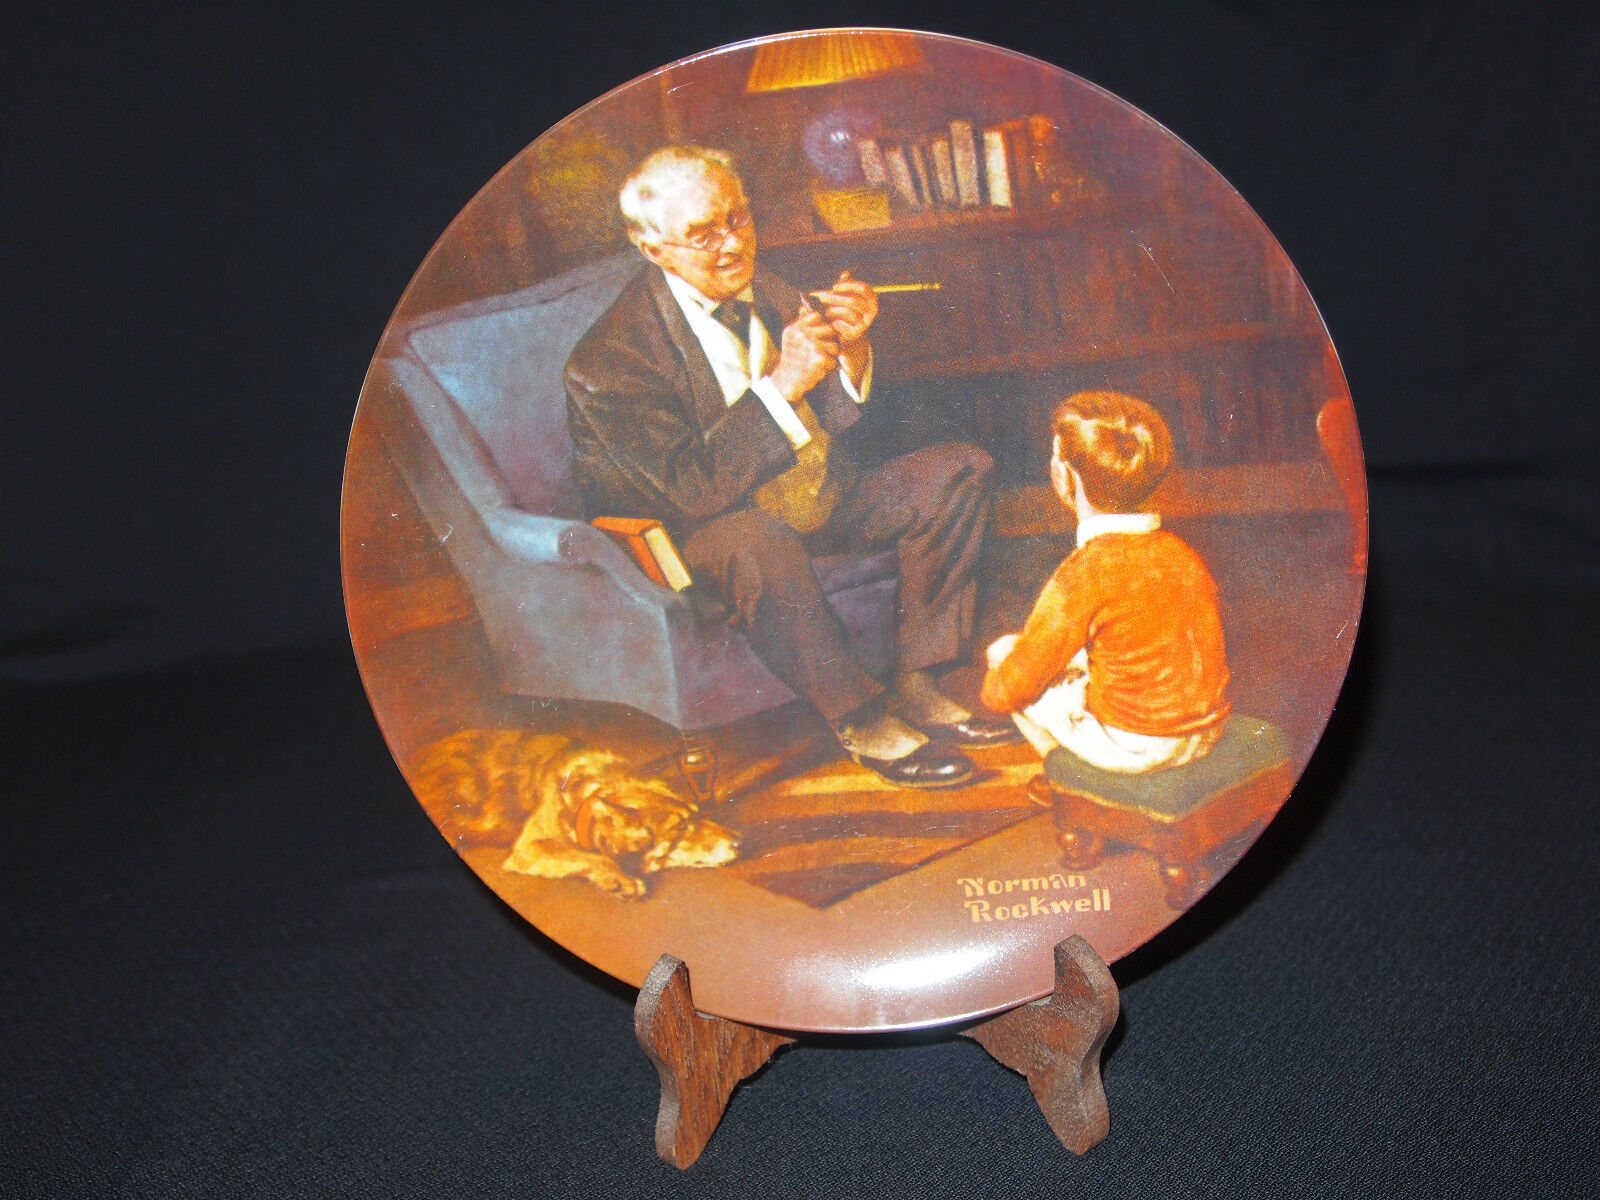 VTG NORMAN ROCKWELL COLLECTOR PLATE - THE TYCOON - 15893L